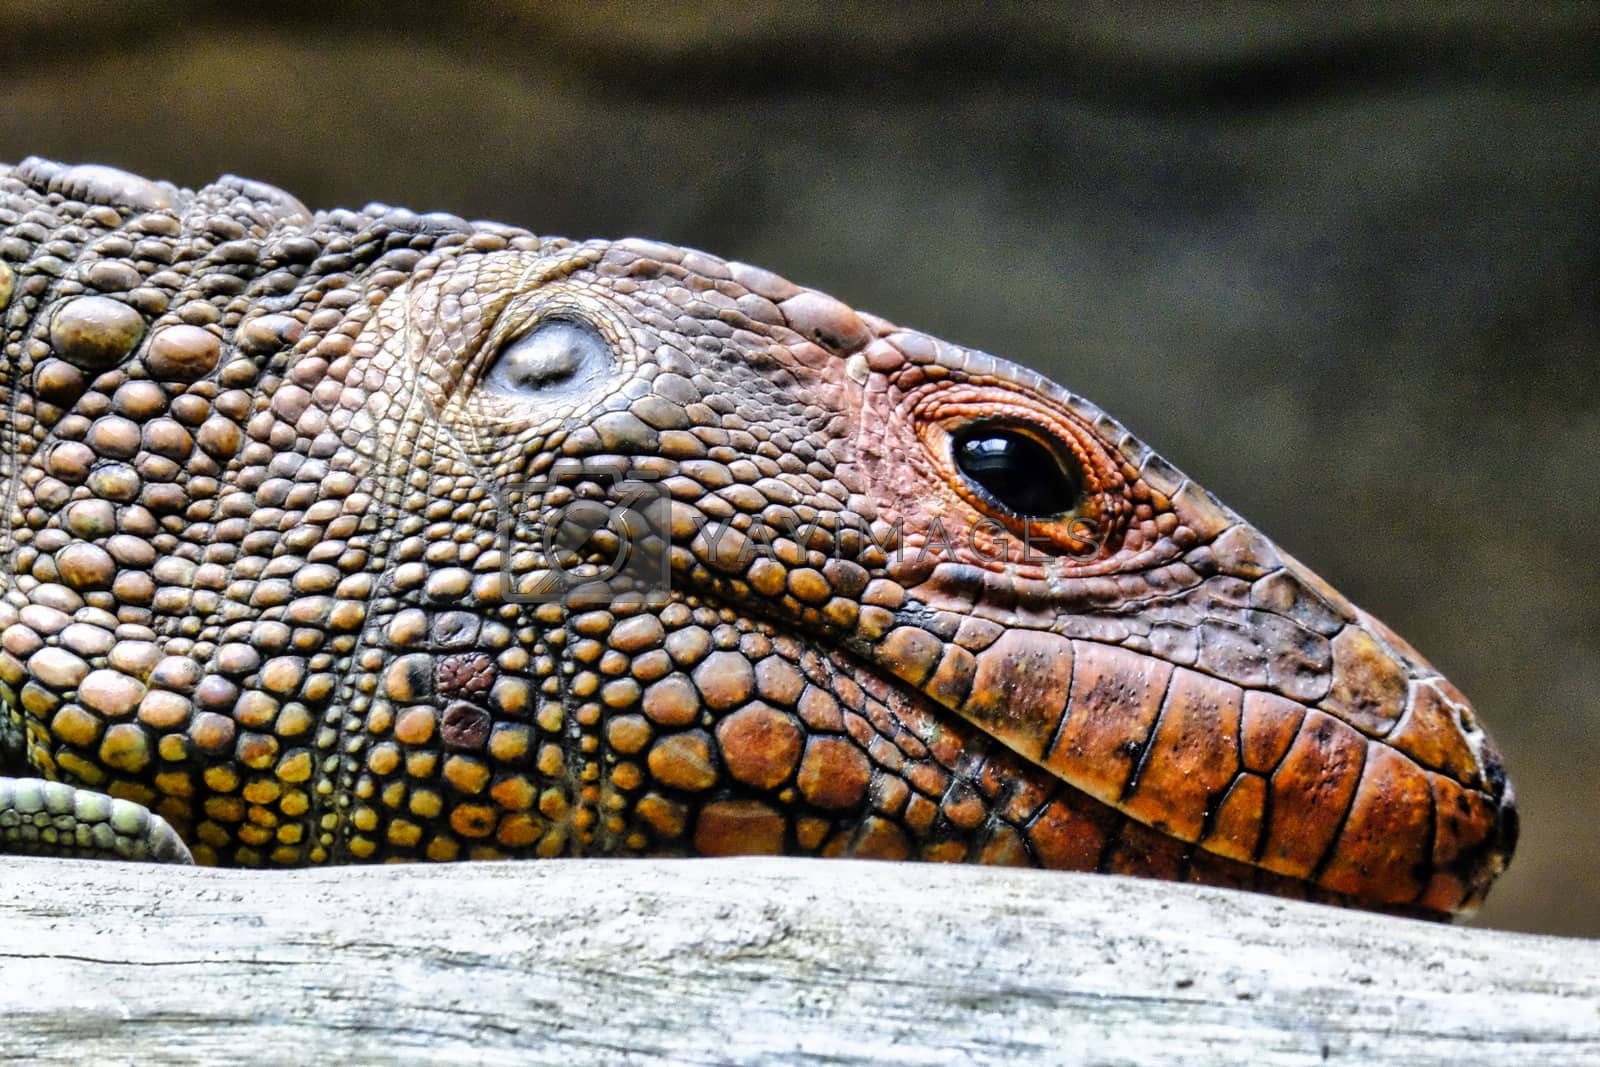 Royalty free image of Caiman Lizard's head. by Vailatese